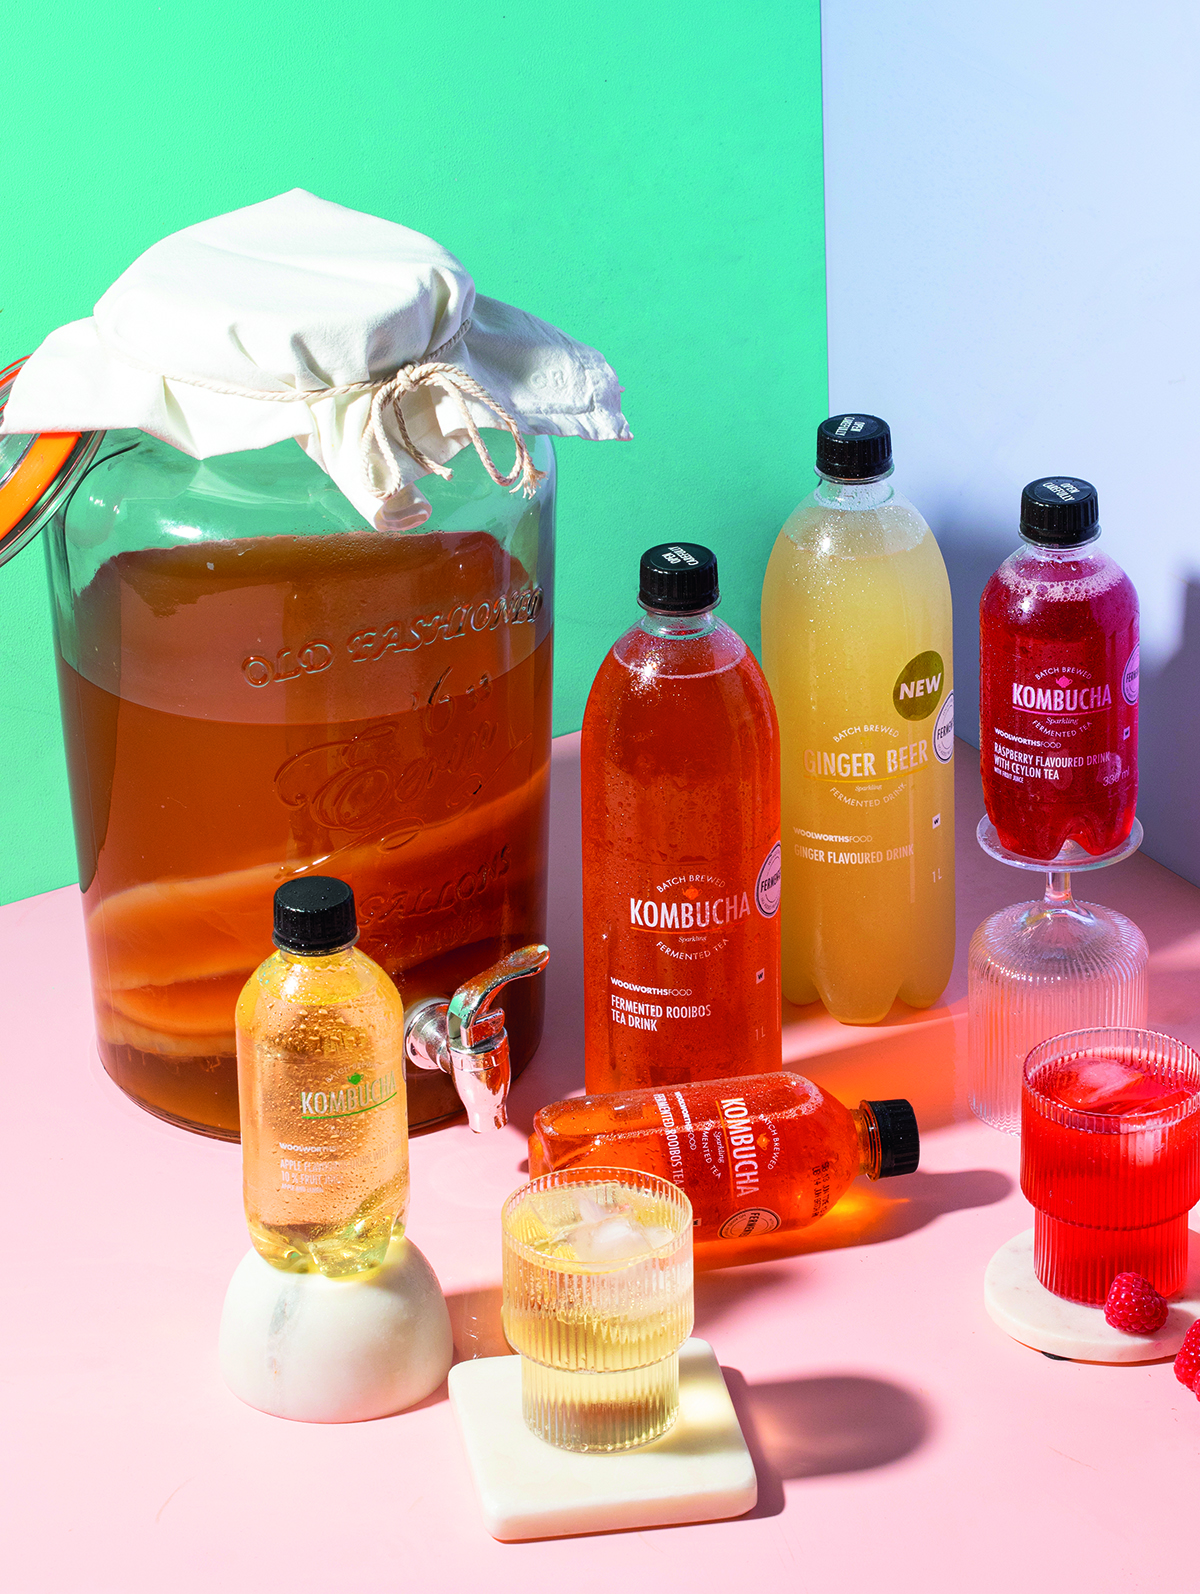 Get some fizzy, tangy kombucha in your belly